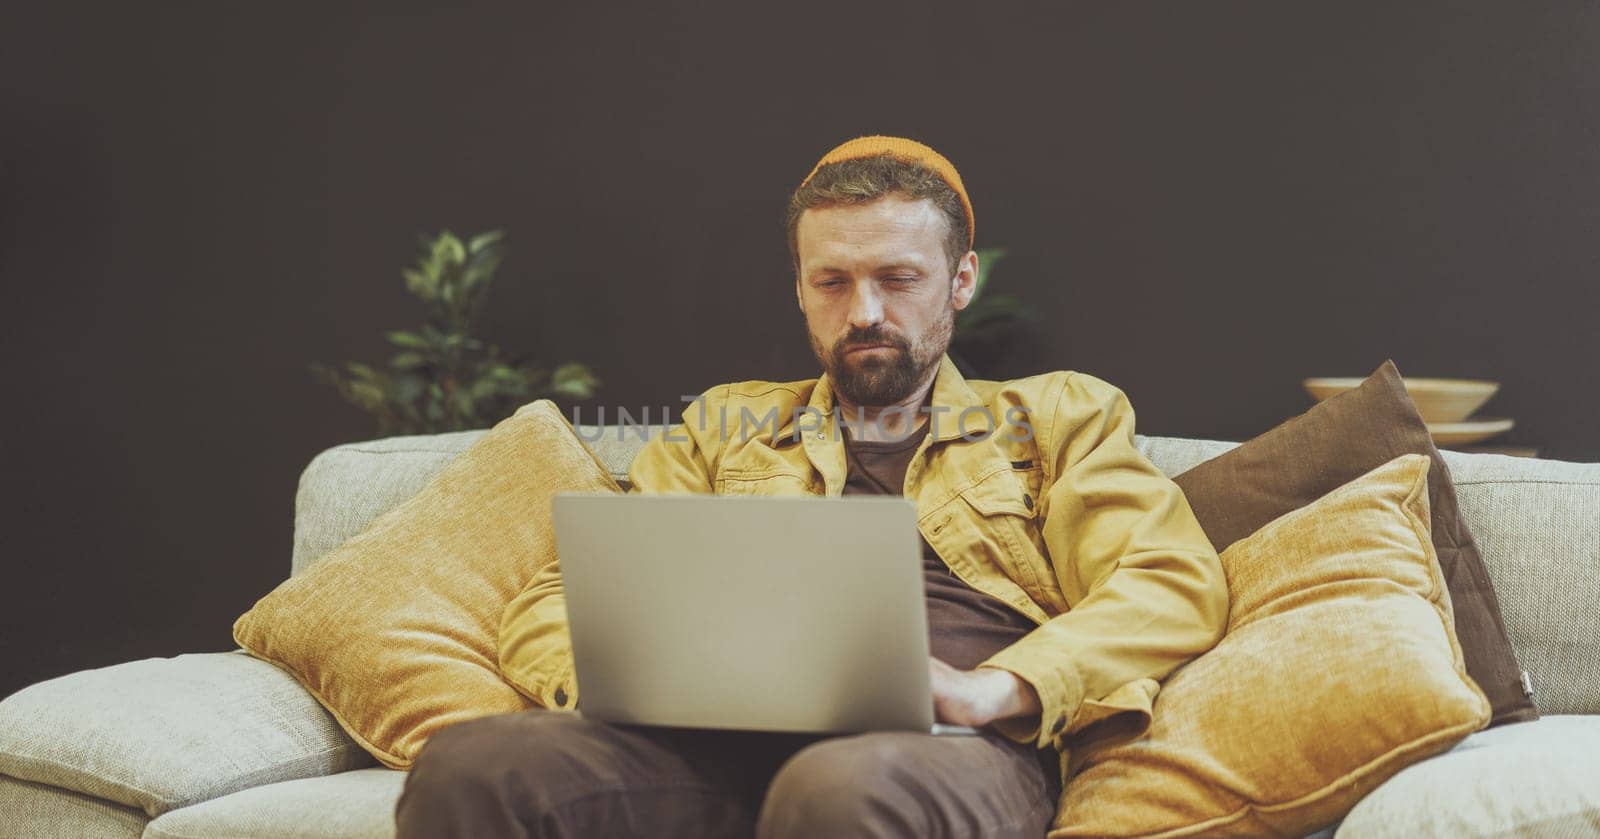 Man sitting on couch with a laptop, engaged in work or other digital activities. Relaxed and comfortable setting of couch suggests that man is in home office or cozy indoor environment. by LipikStockMedia